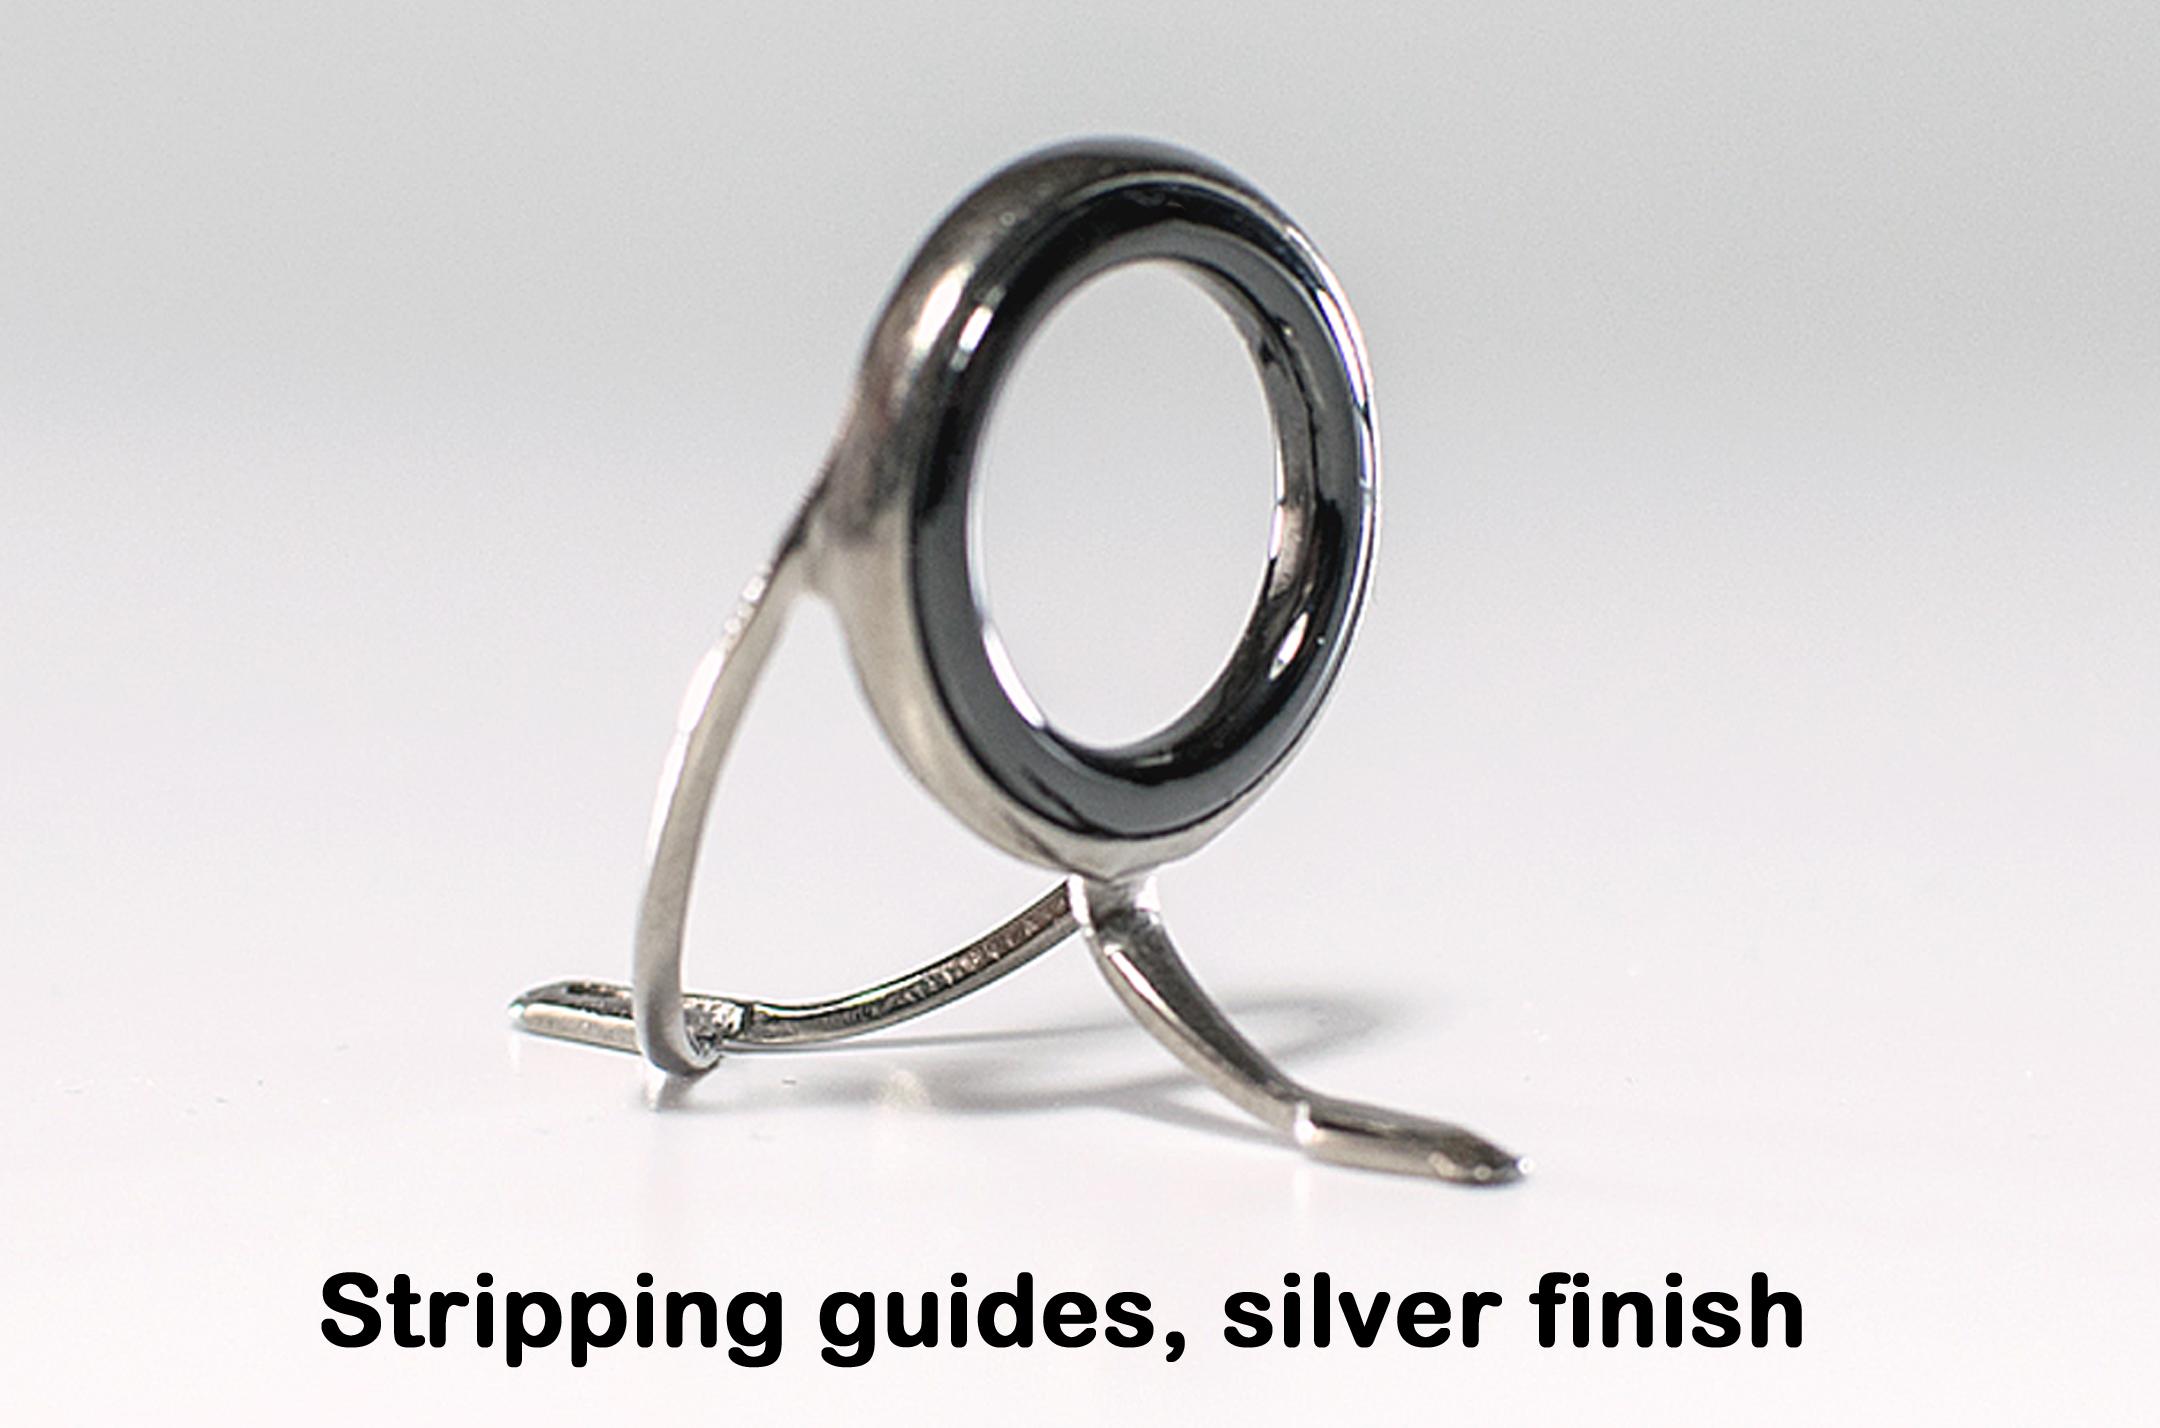 Silver chrome fly rod stripping guides